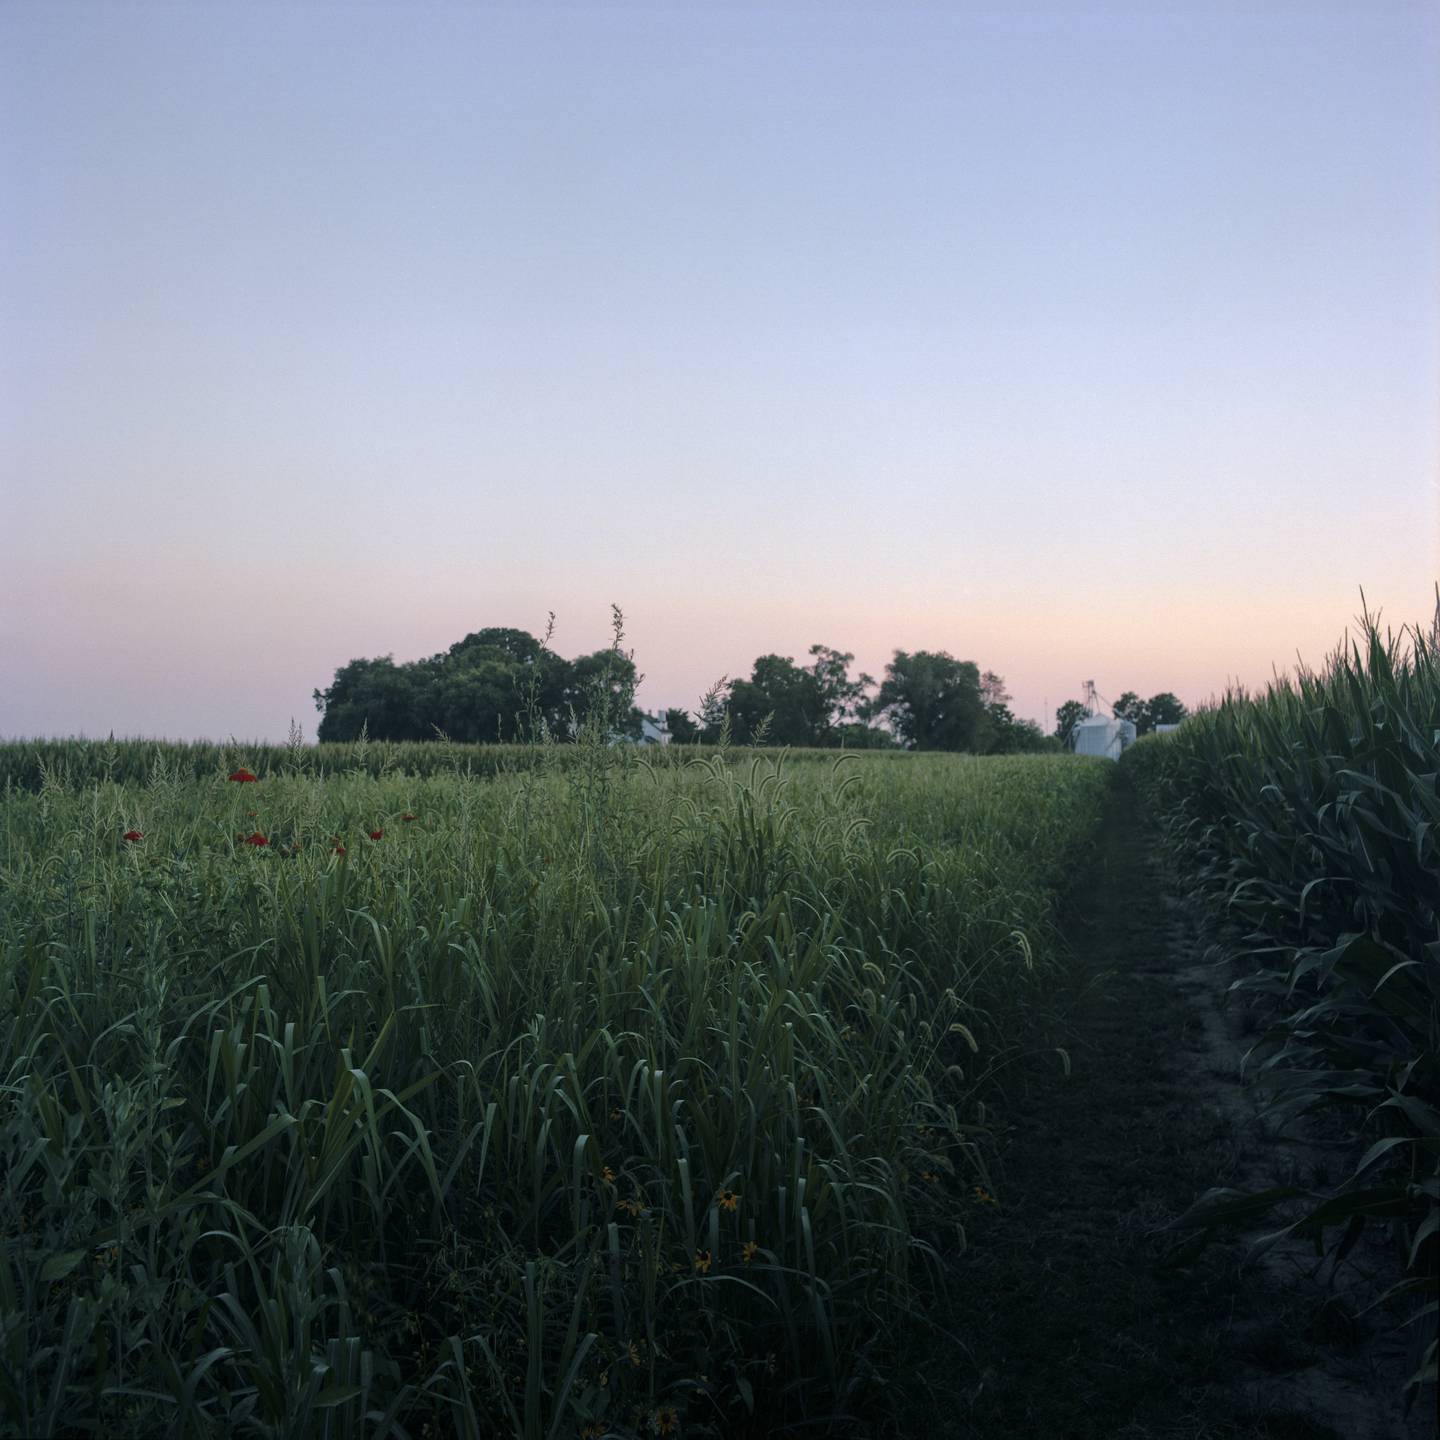 A wild flower pollinator field between corn fields seen at dusk with the Emory Farm in the distance on August 3rd, 2022 in Queenstown Maryland